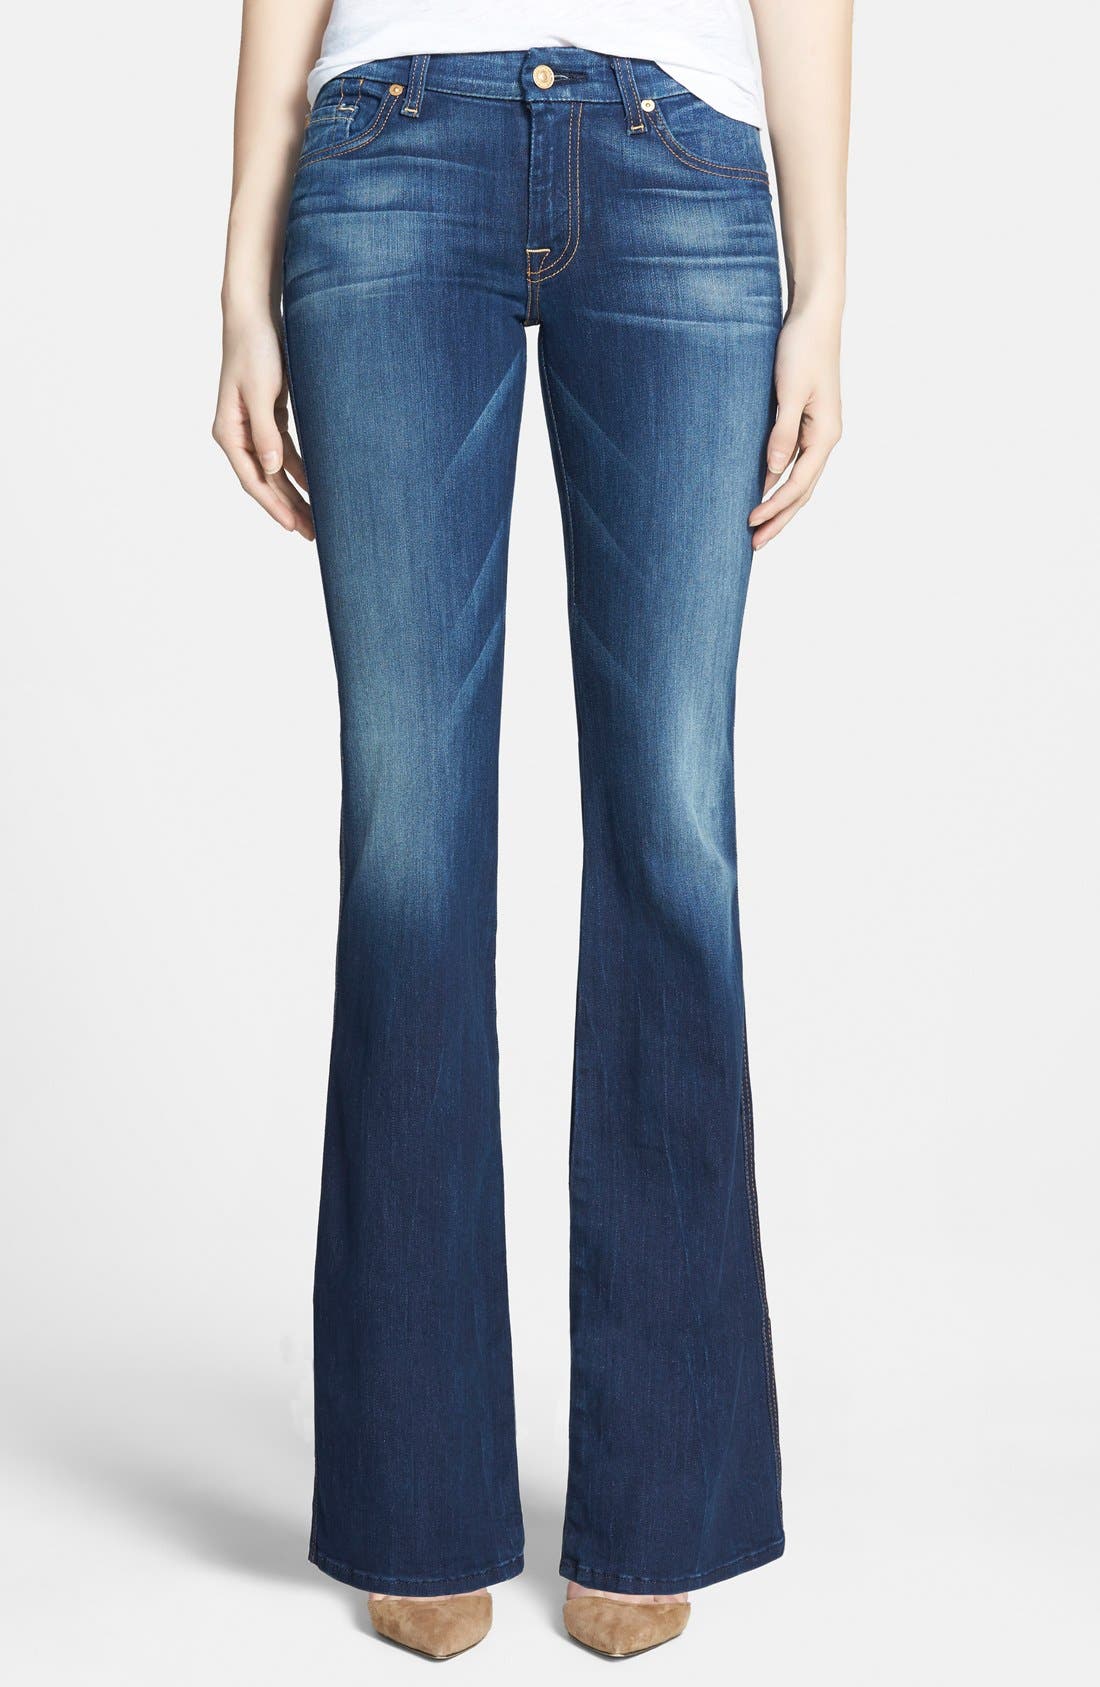 seven for all mankind petite jeans